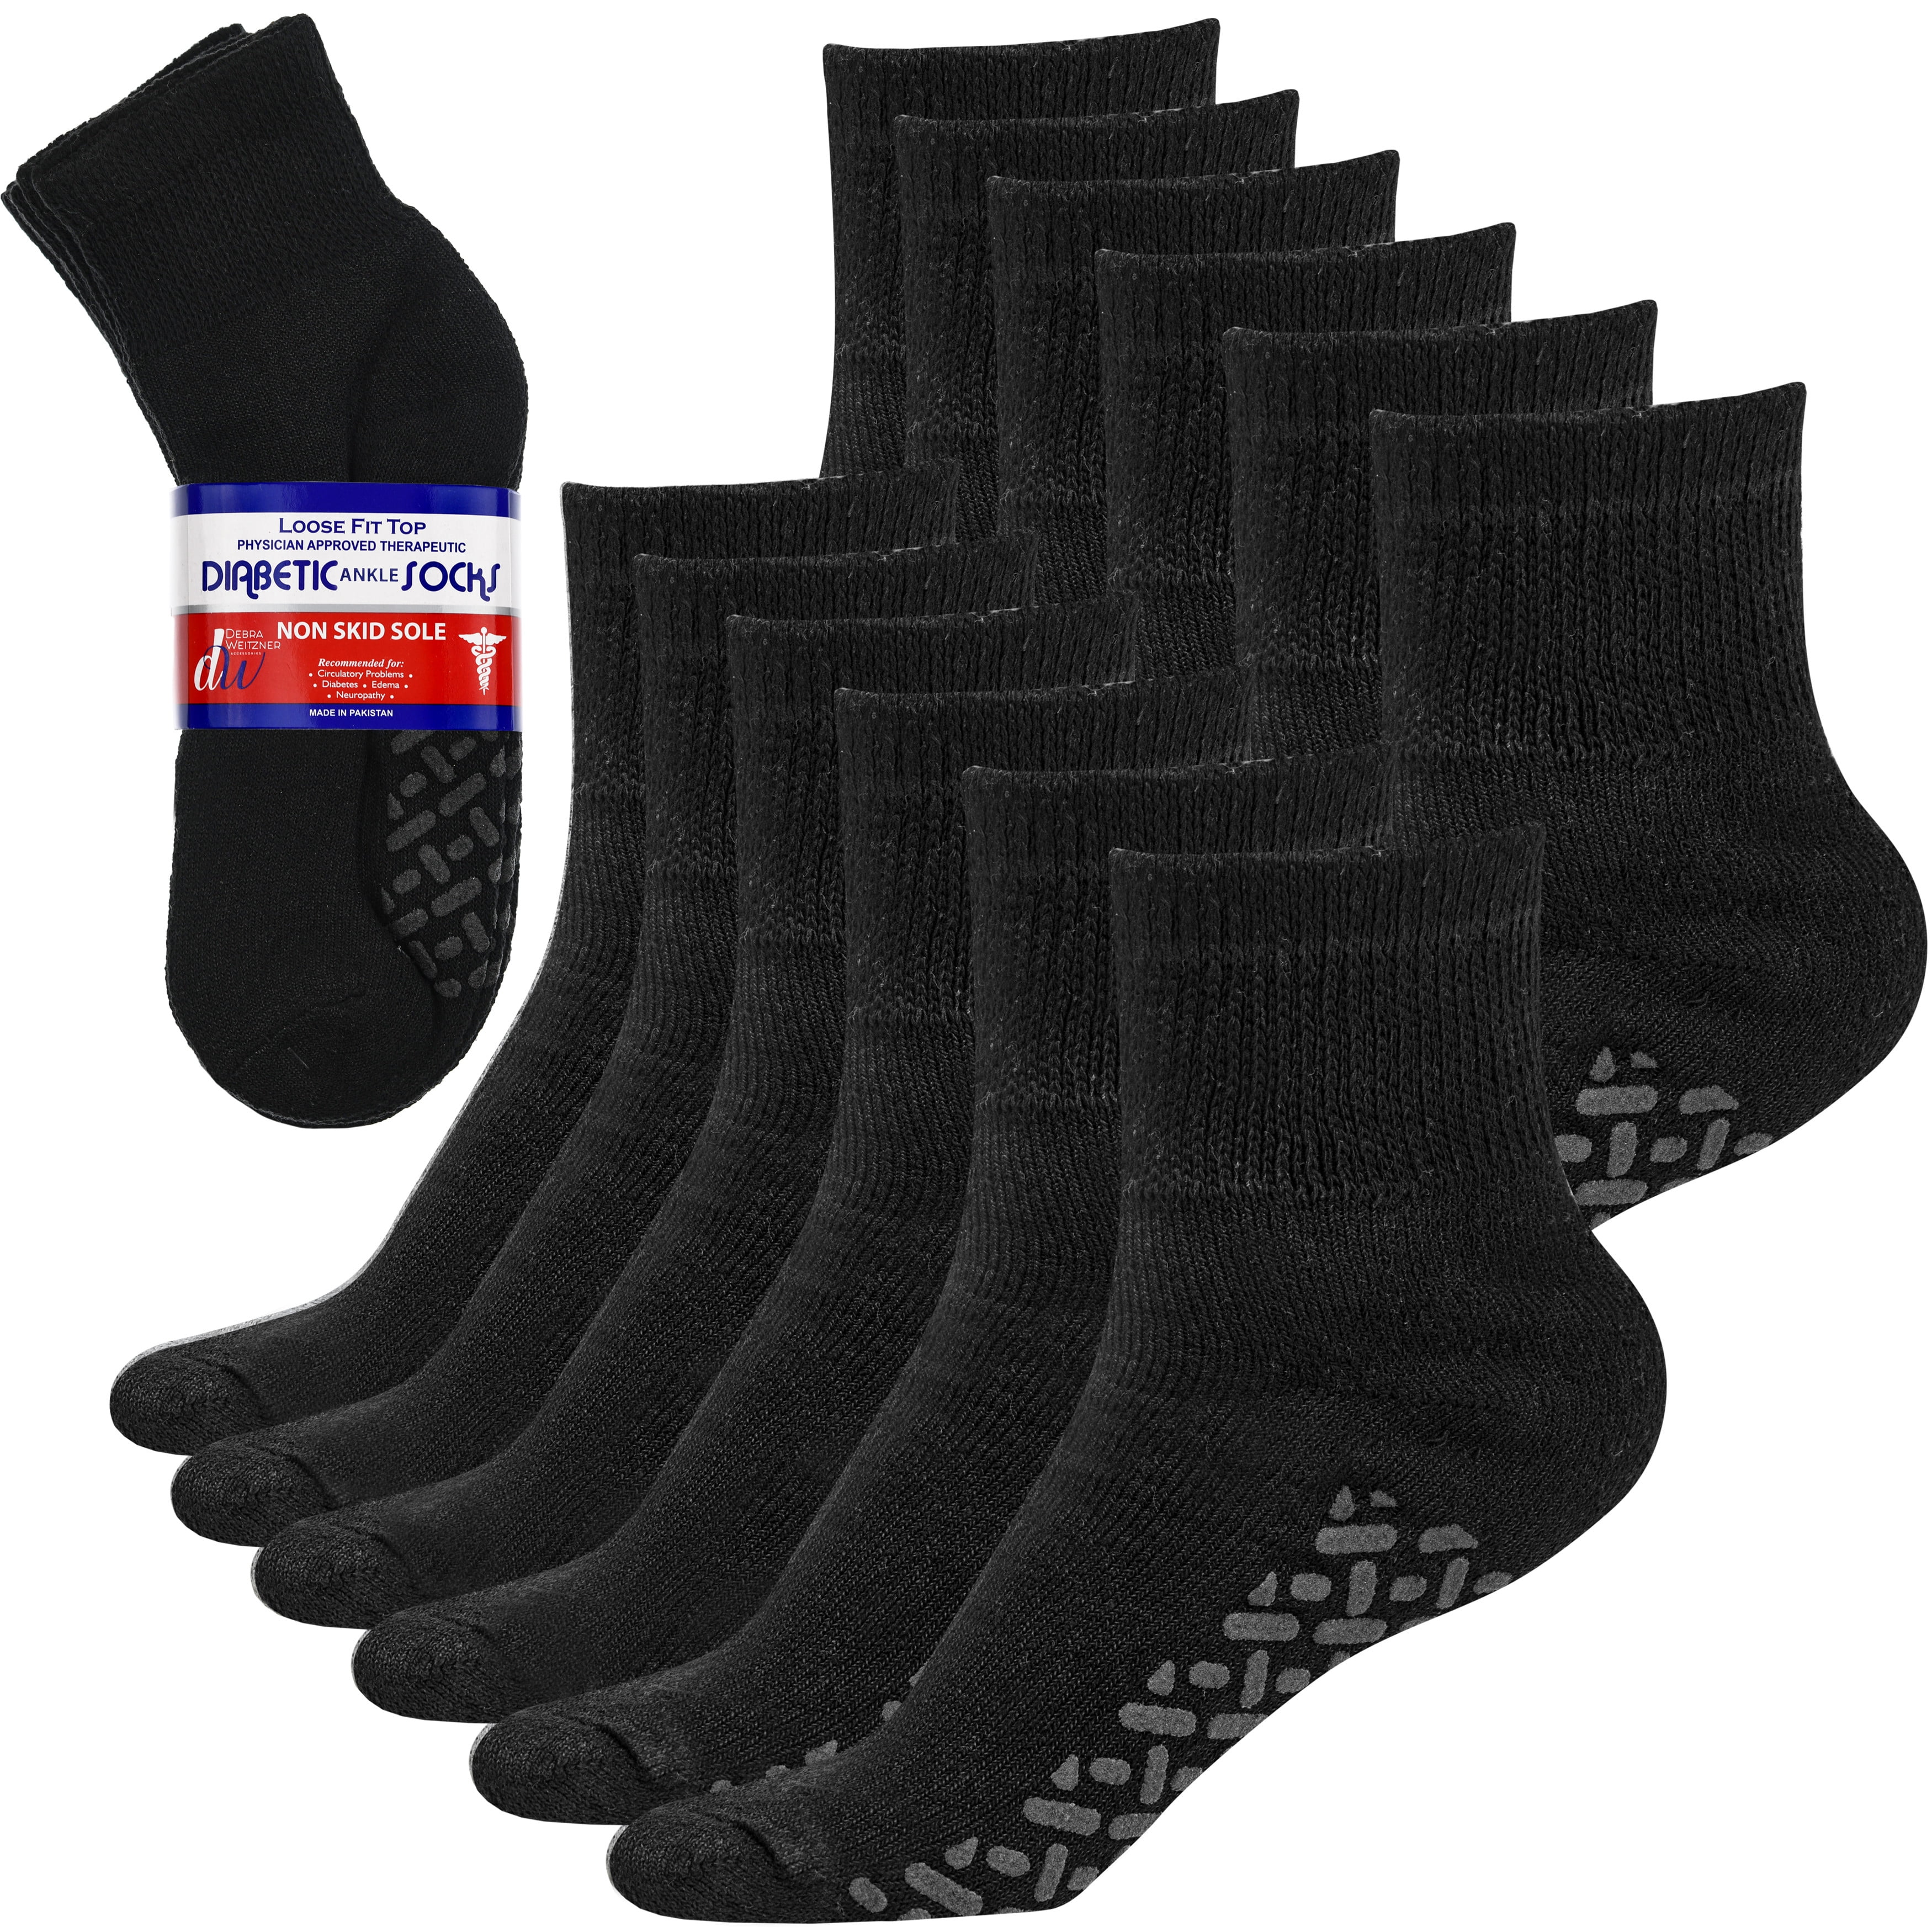 miracle Sympathize View the Internet Debra Weitzner Non-Binding Loose Fit Sock - Non-Slip Diabetic Socks for Men  and Women - Crew 12 Pack Black Size 9-11 - Walmart.com